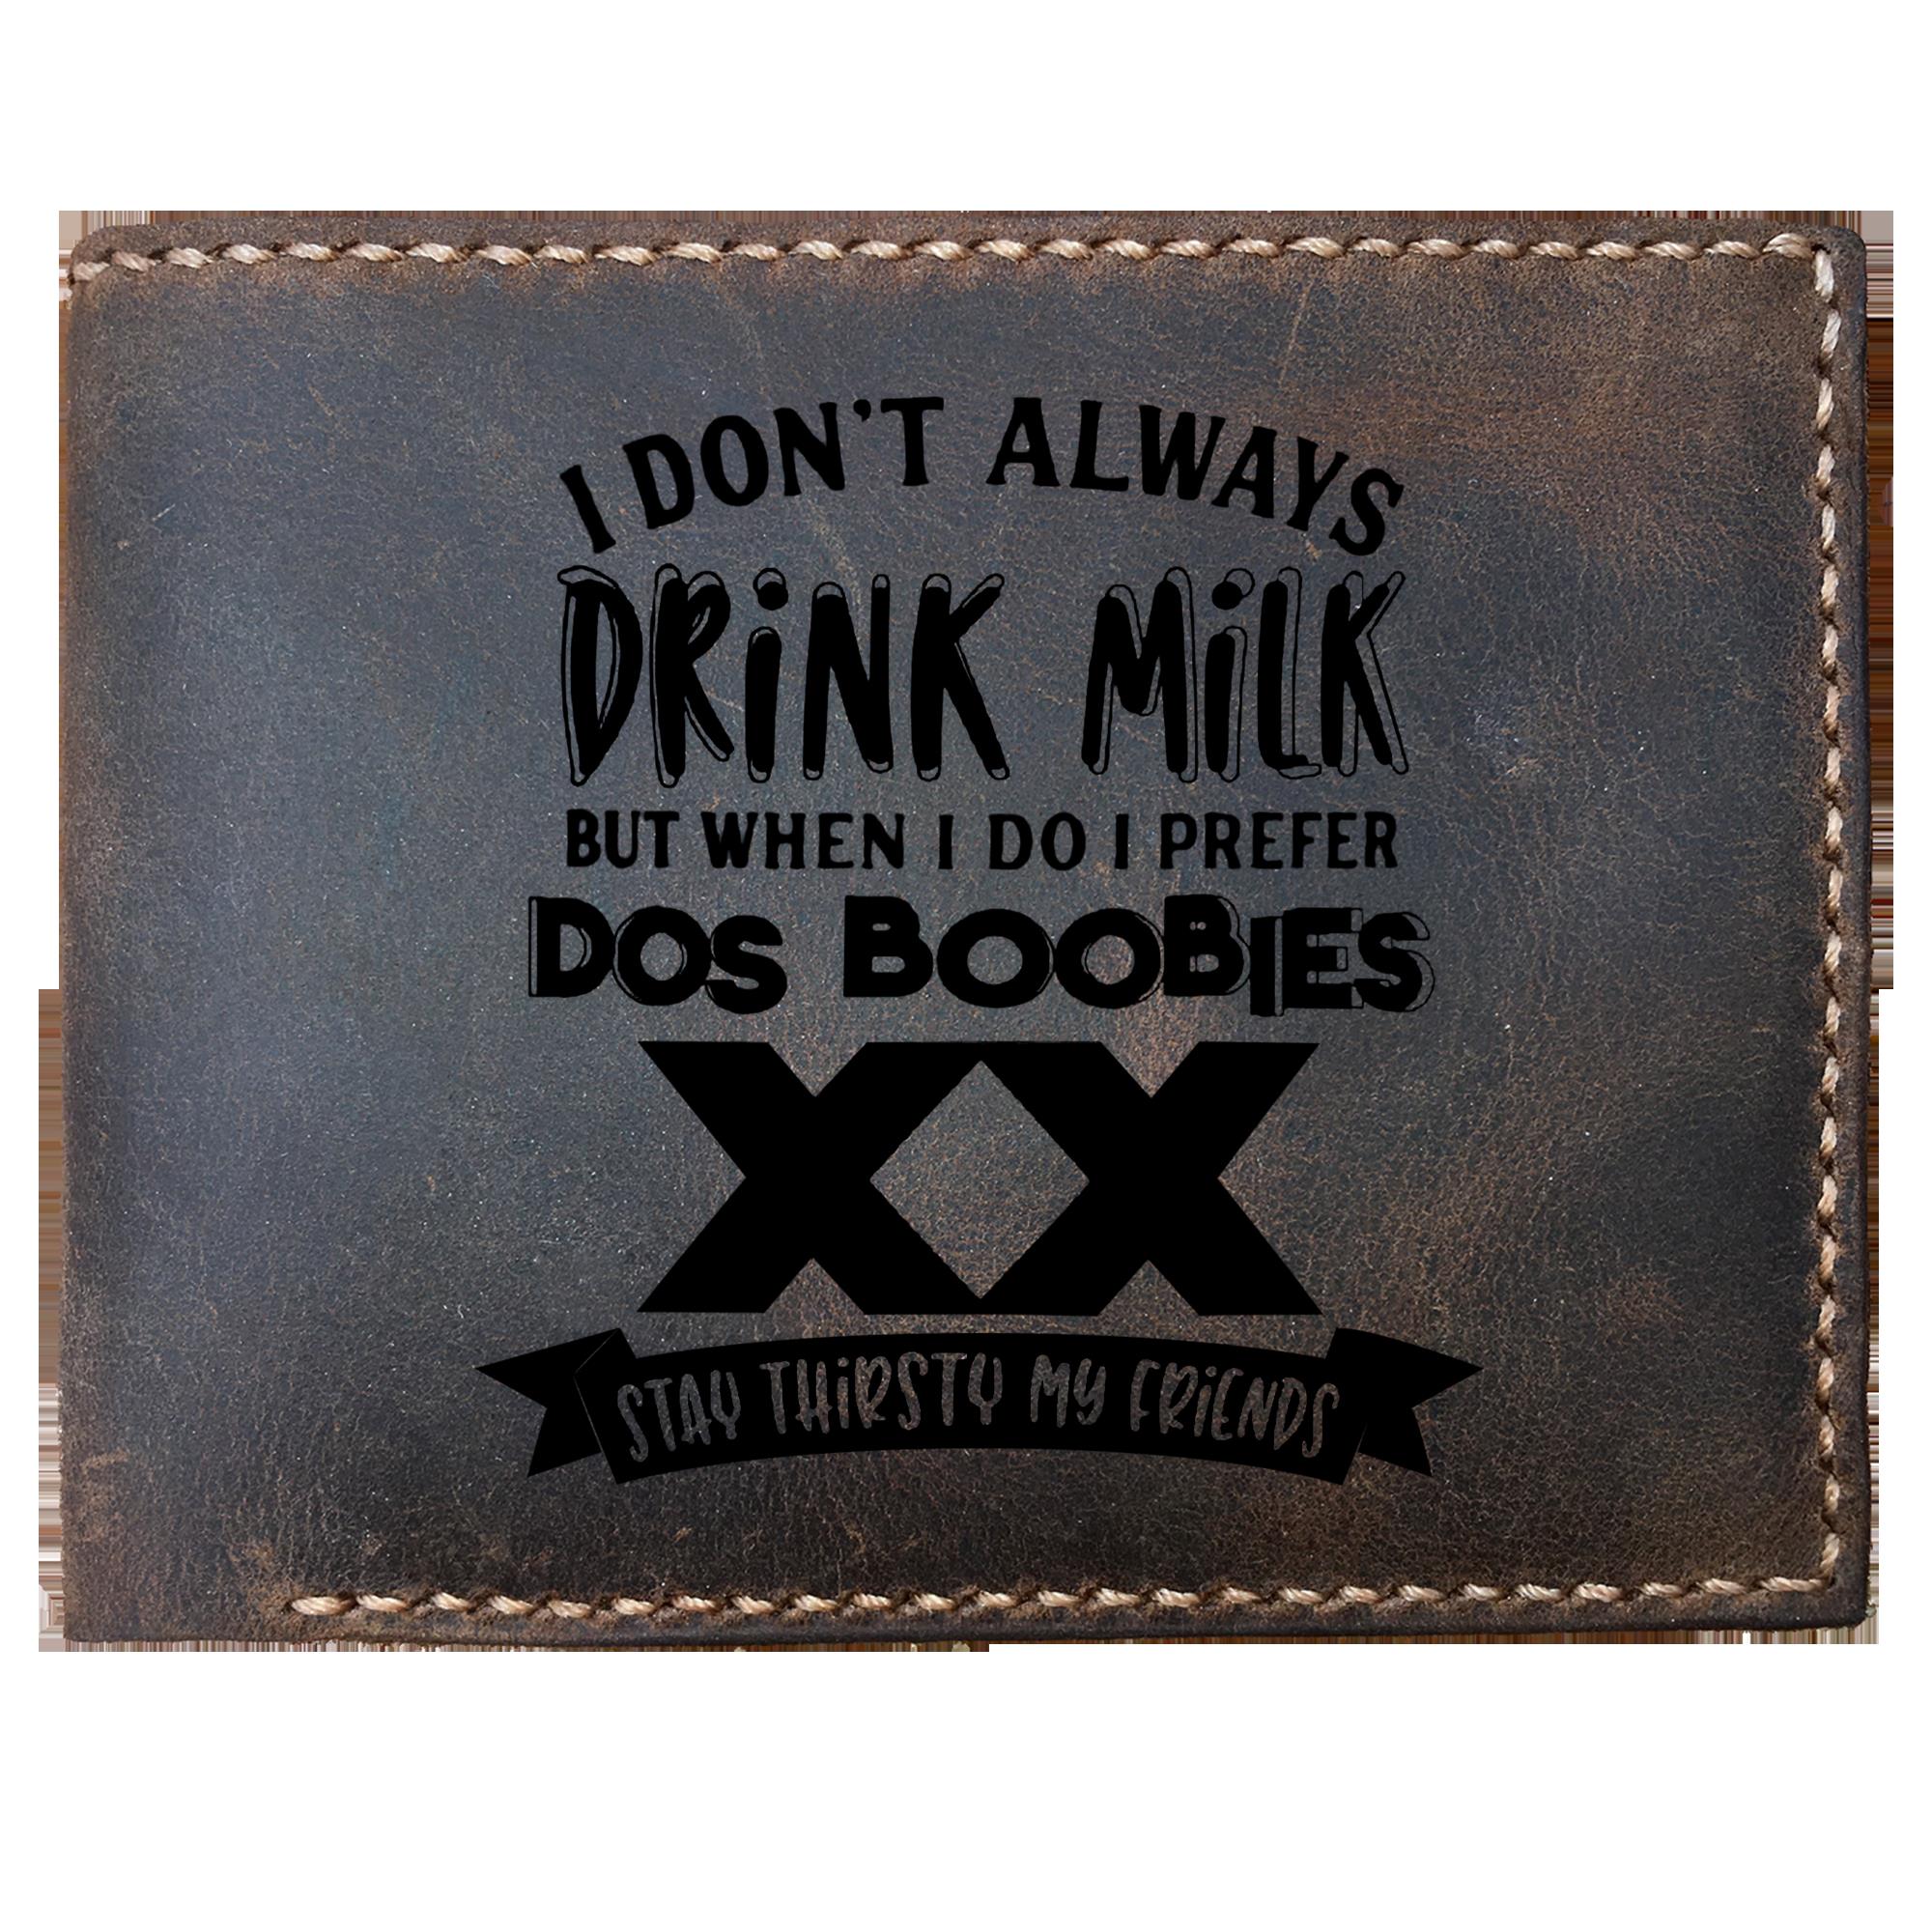 Skitongifts Funny Custom Laser Engraved Bifold Leather Wallet For Men, Crude Humor Stay Thirsty My Friends